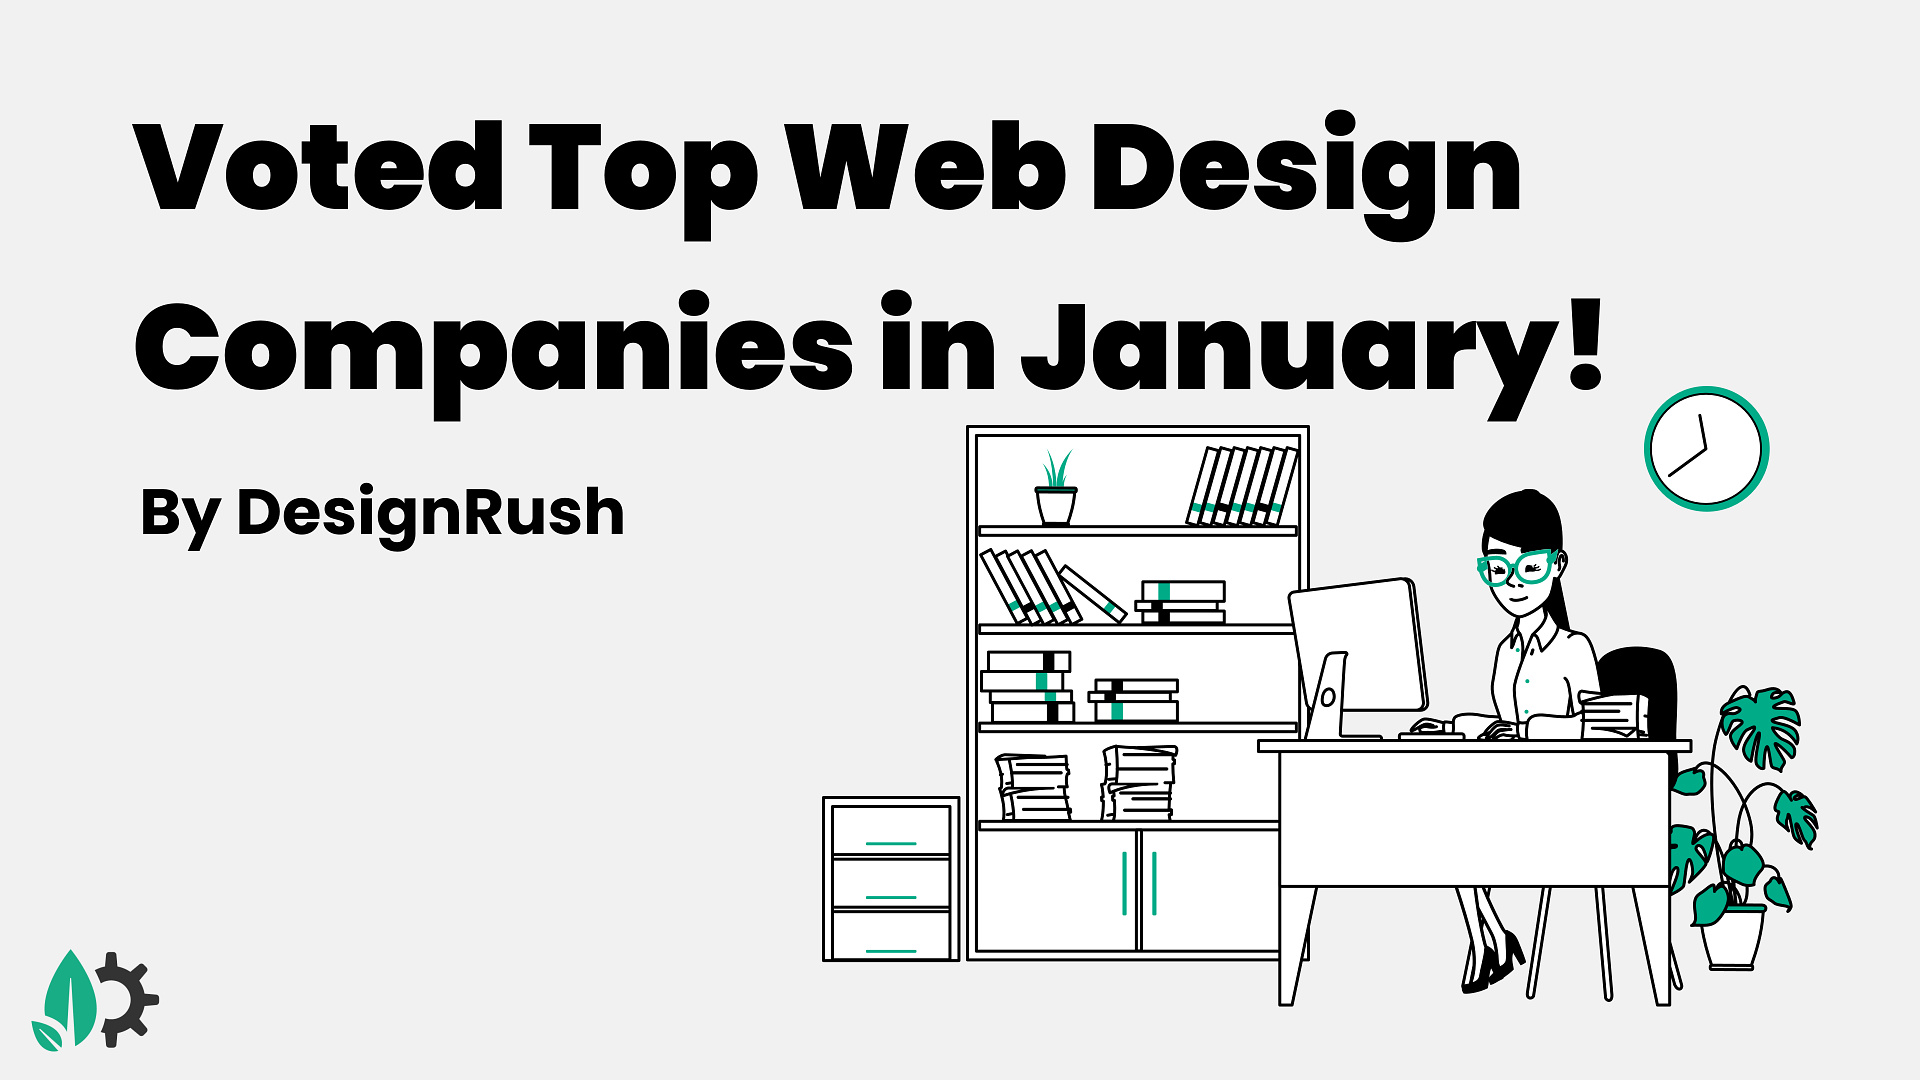 Synmek Makes The Top Web Design Companies in January List!